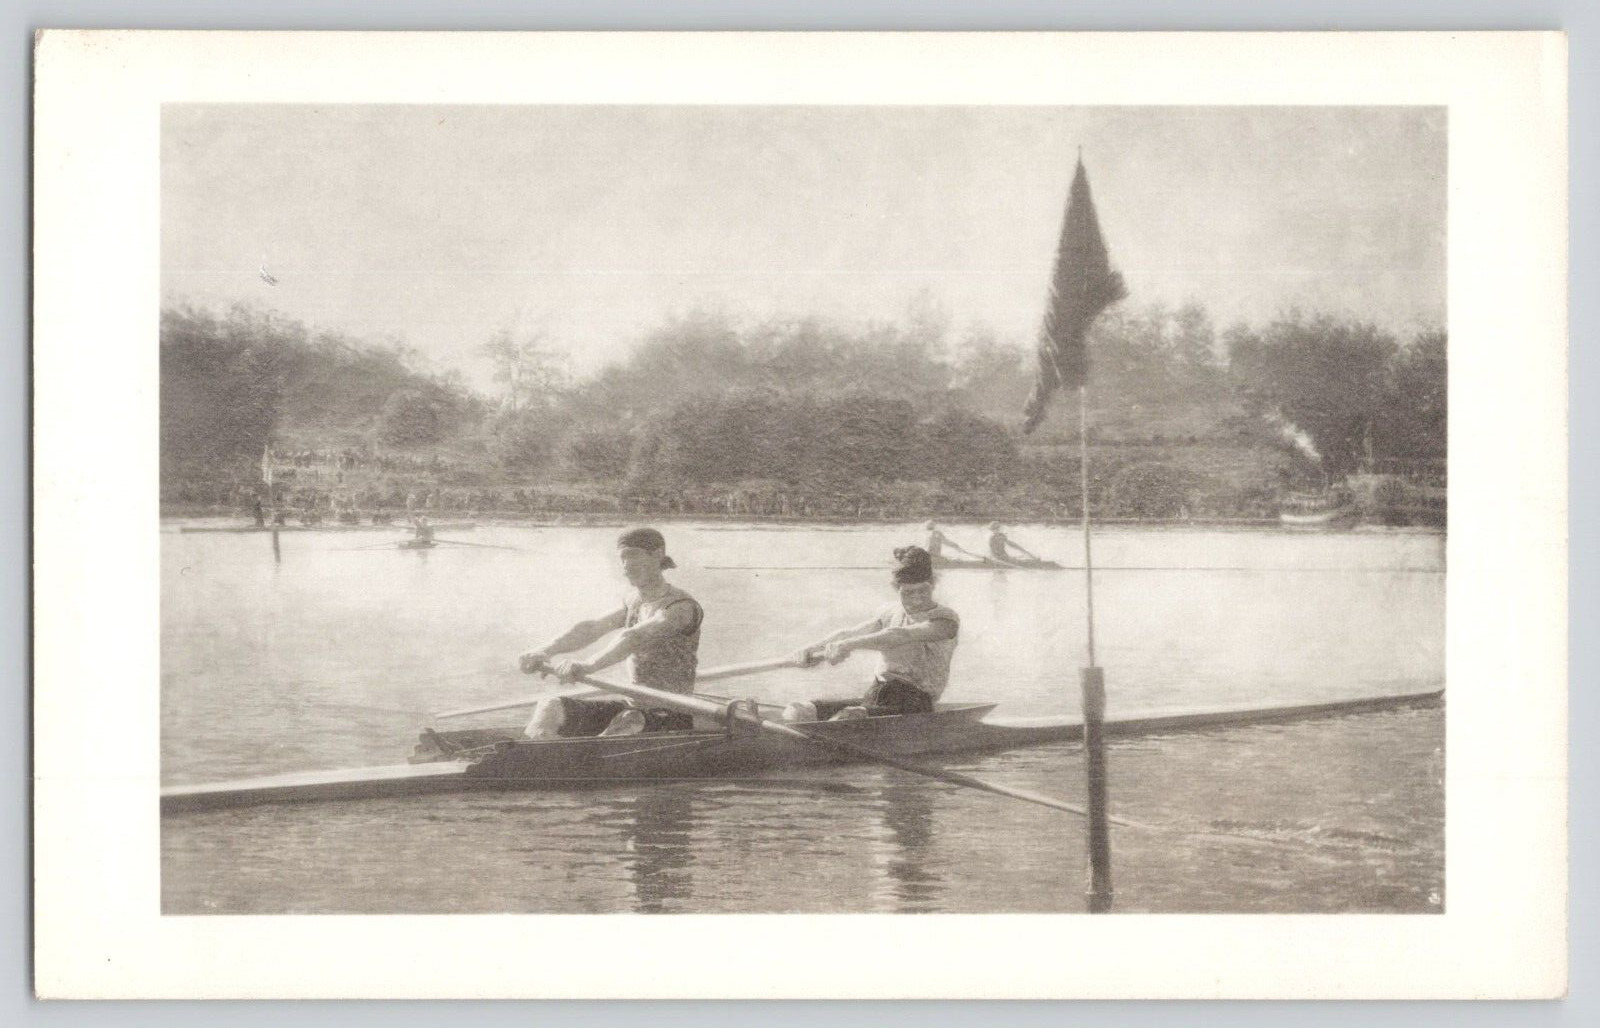 Postcard Turning The Stake Boat, Thomas Eakins, The Cleaveland Museum of Art